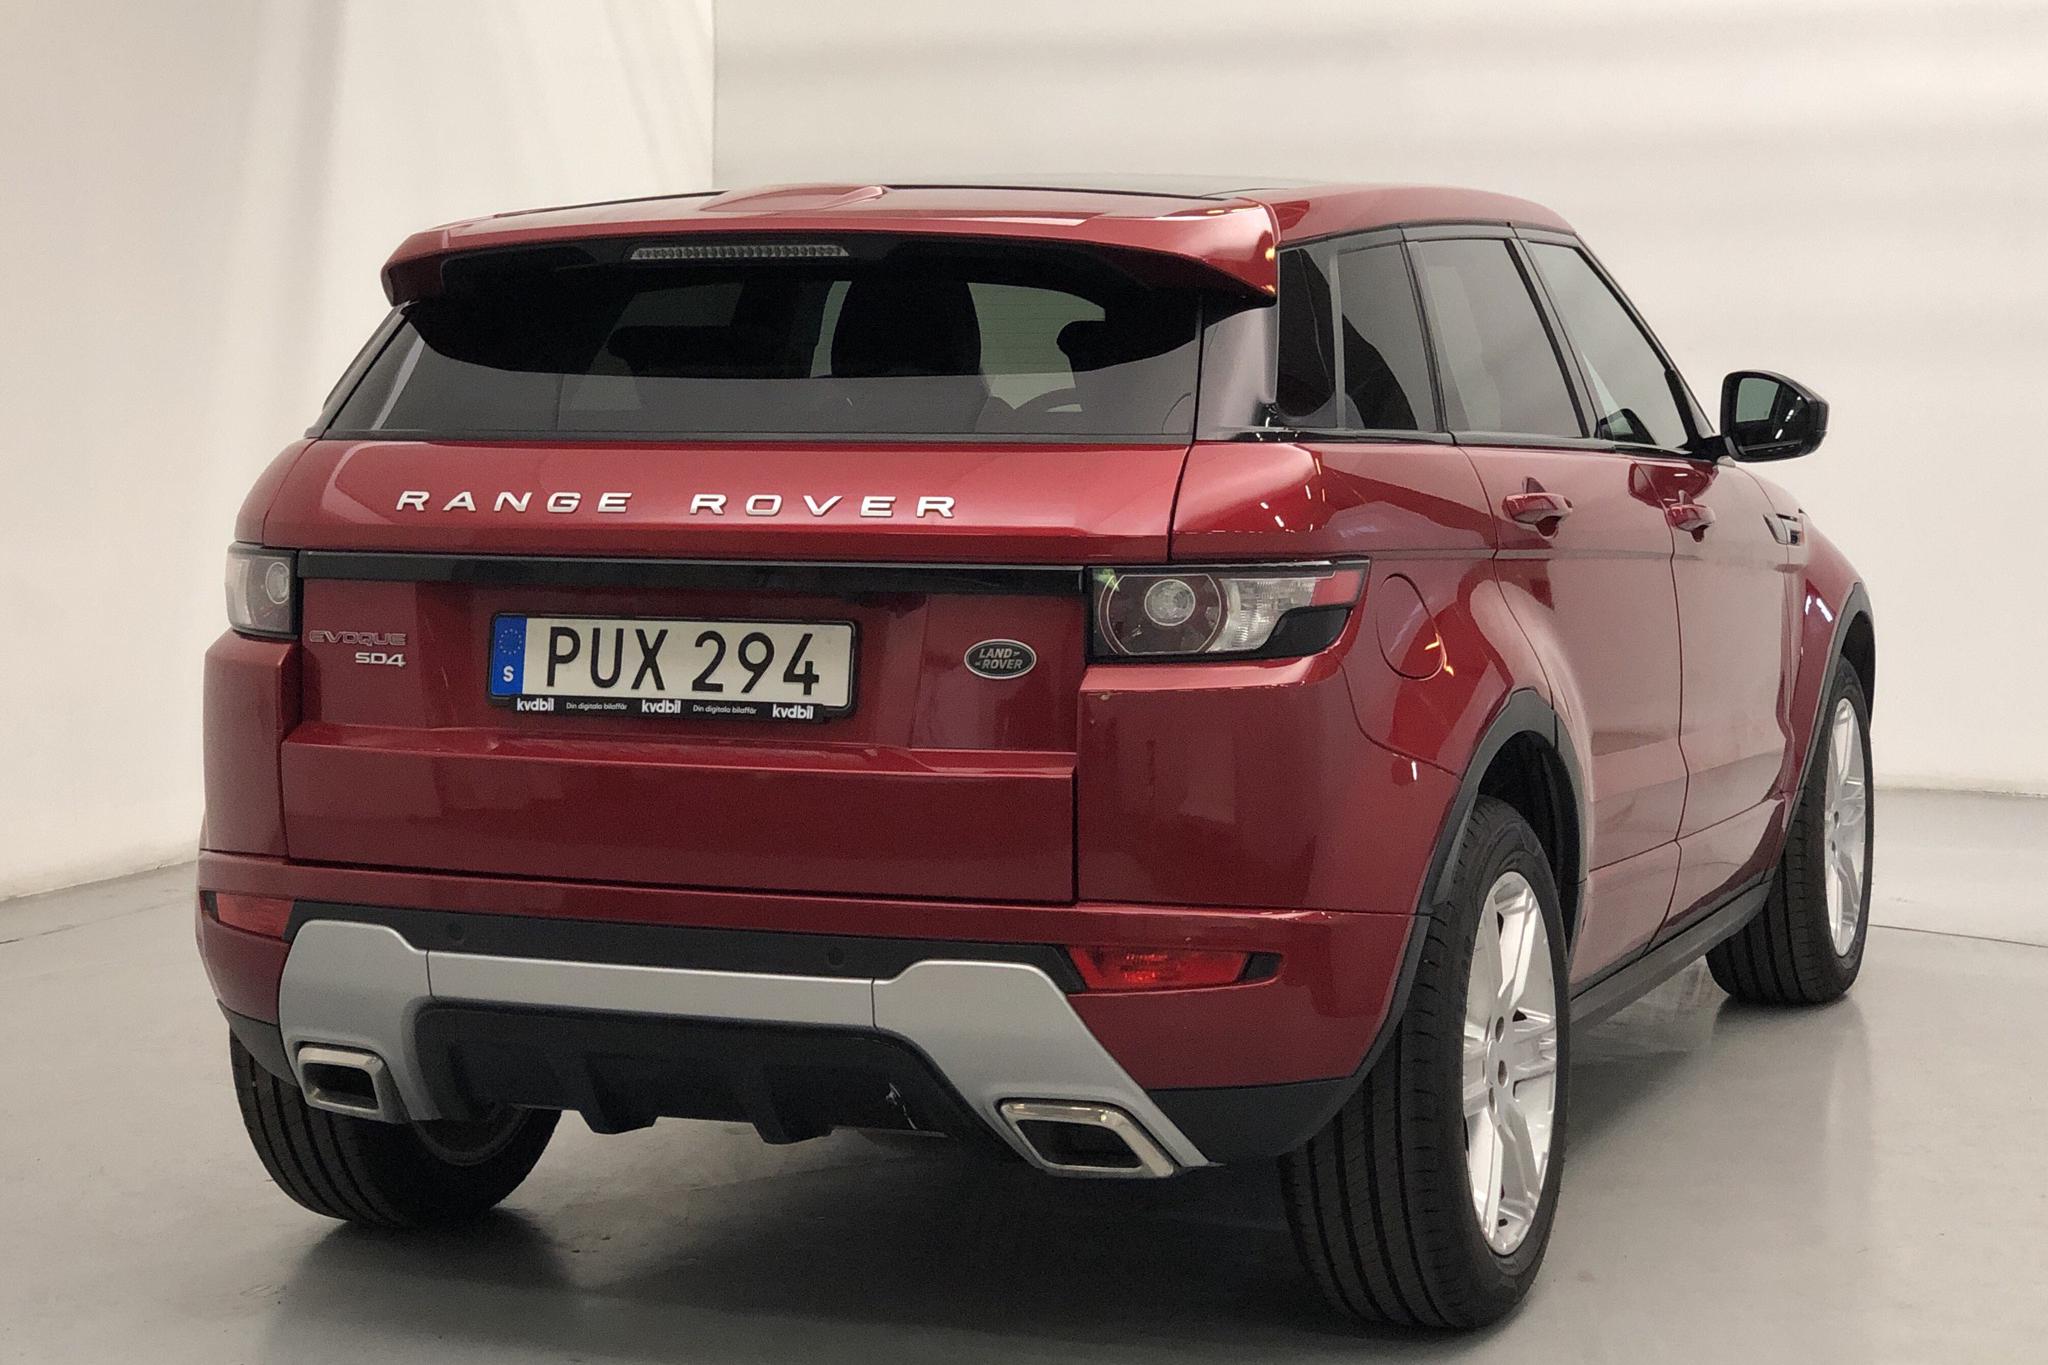 Land Rover Range Rover Evoque 2.2 SD4 5dr (190hk) - 95 380 km - Automatic - red - 2015